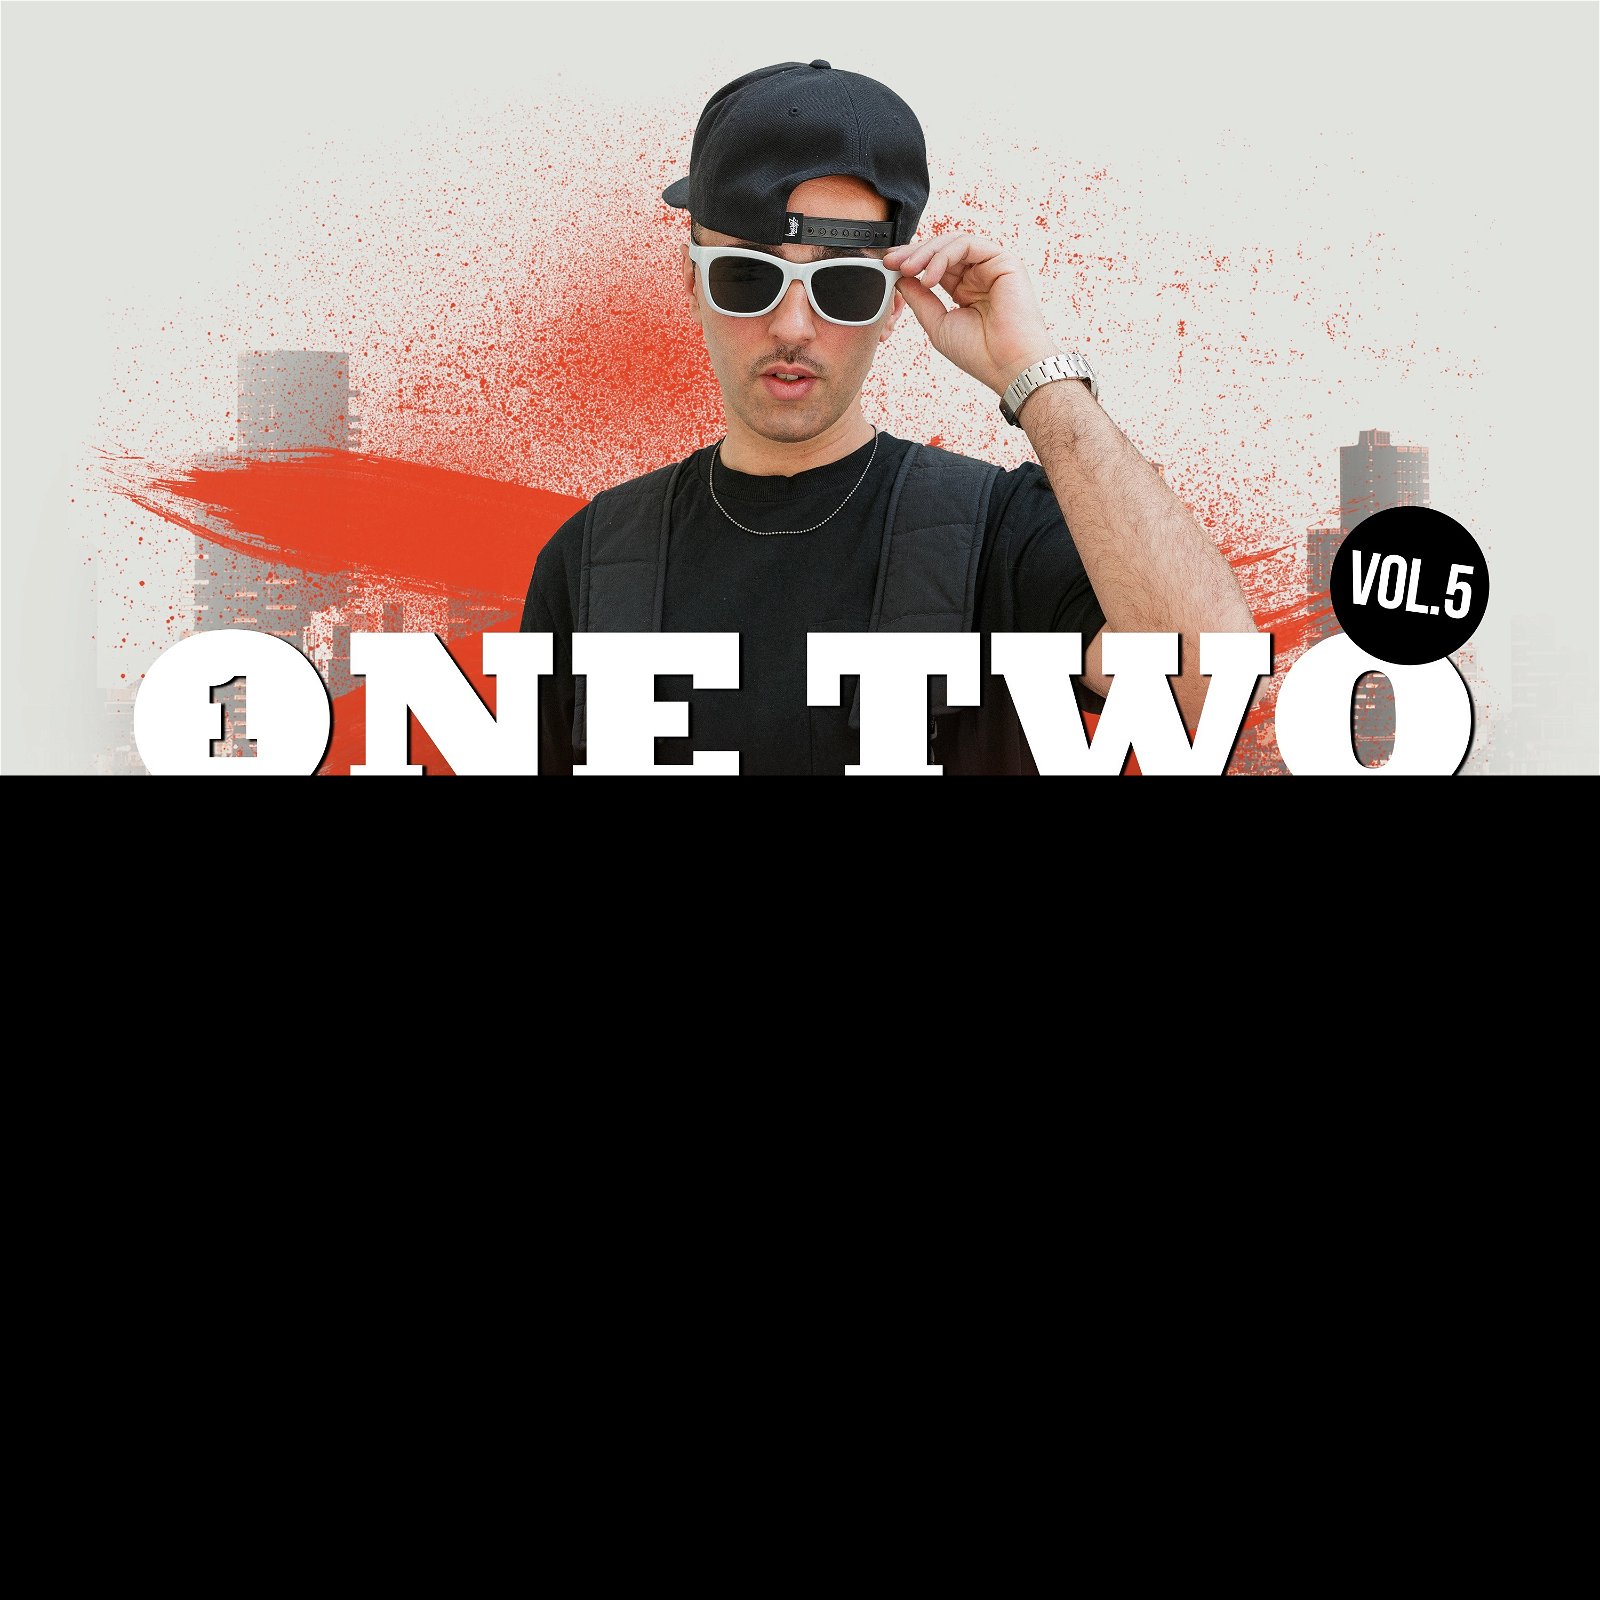 CD Shop - V/A ONE TWO ONE TWO VOL. 5 - RAP ITALIANO 2021